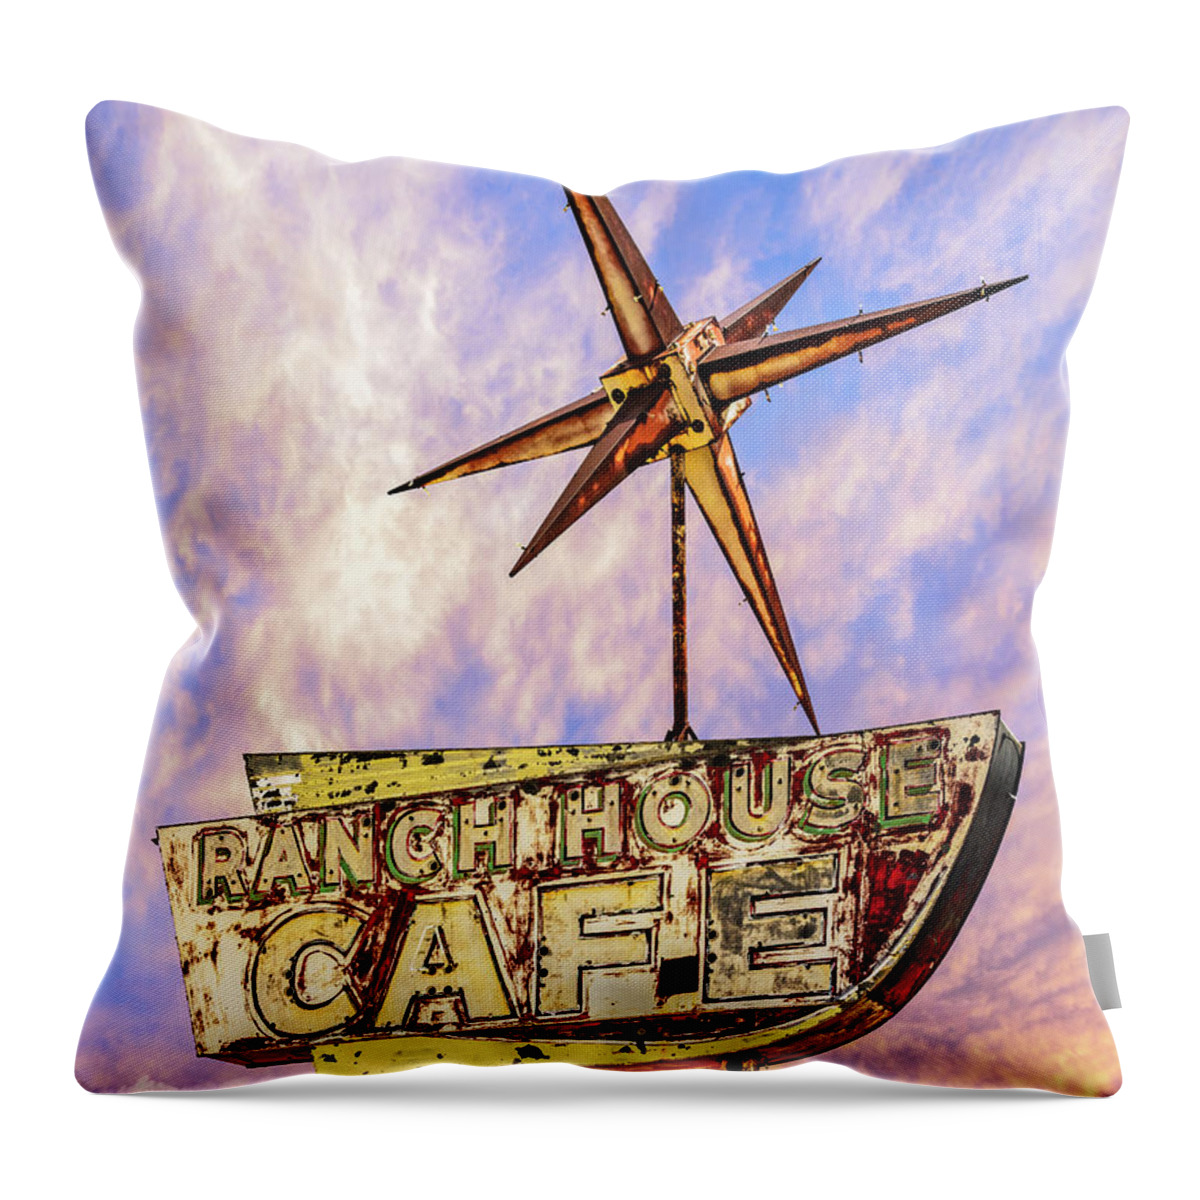 © 2018 Lou Novick All Rights Reserved Throw Pillow featuring the photograph Ranch House Cafe #1 by Lou Novick